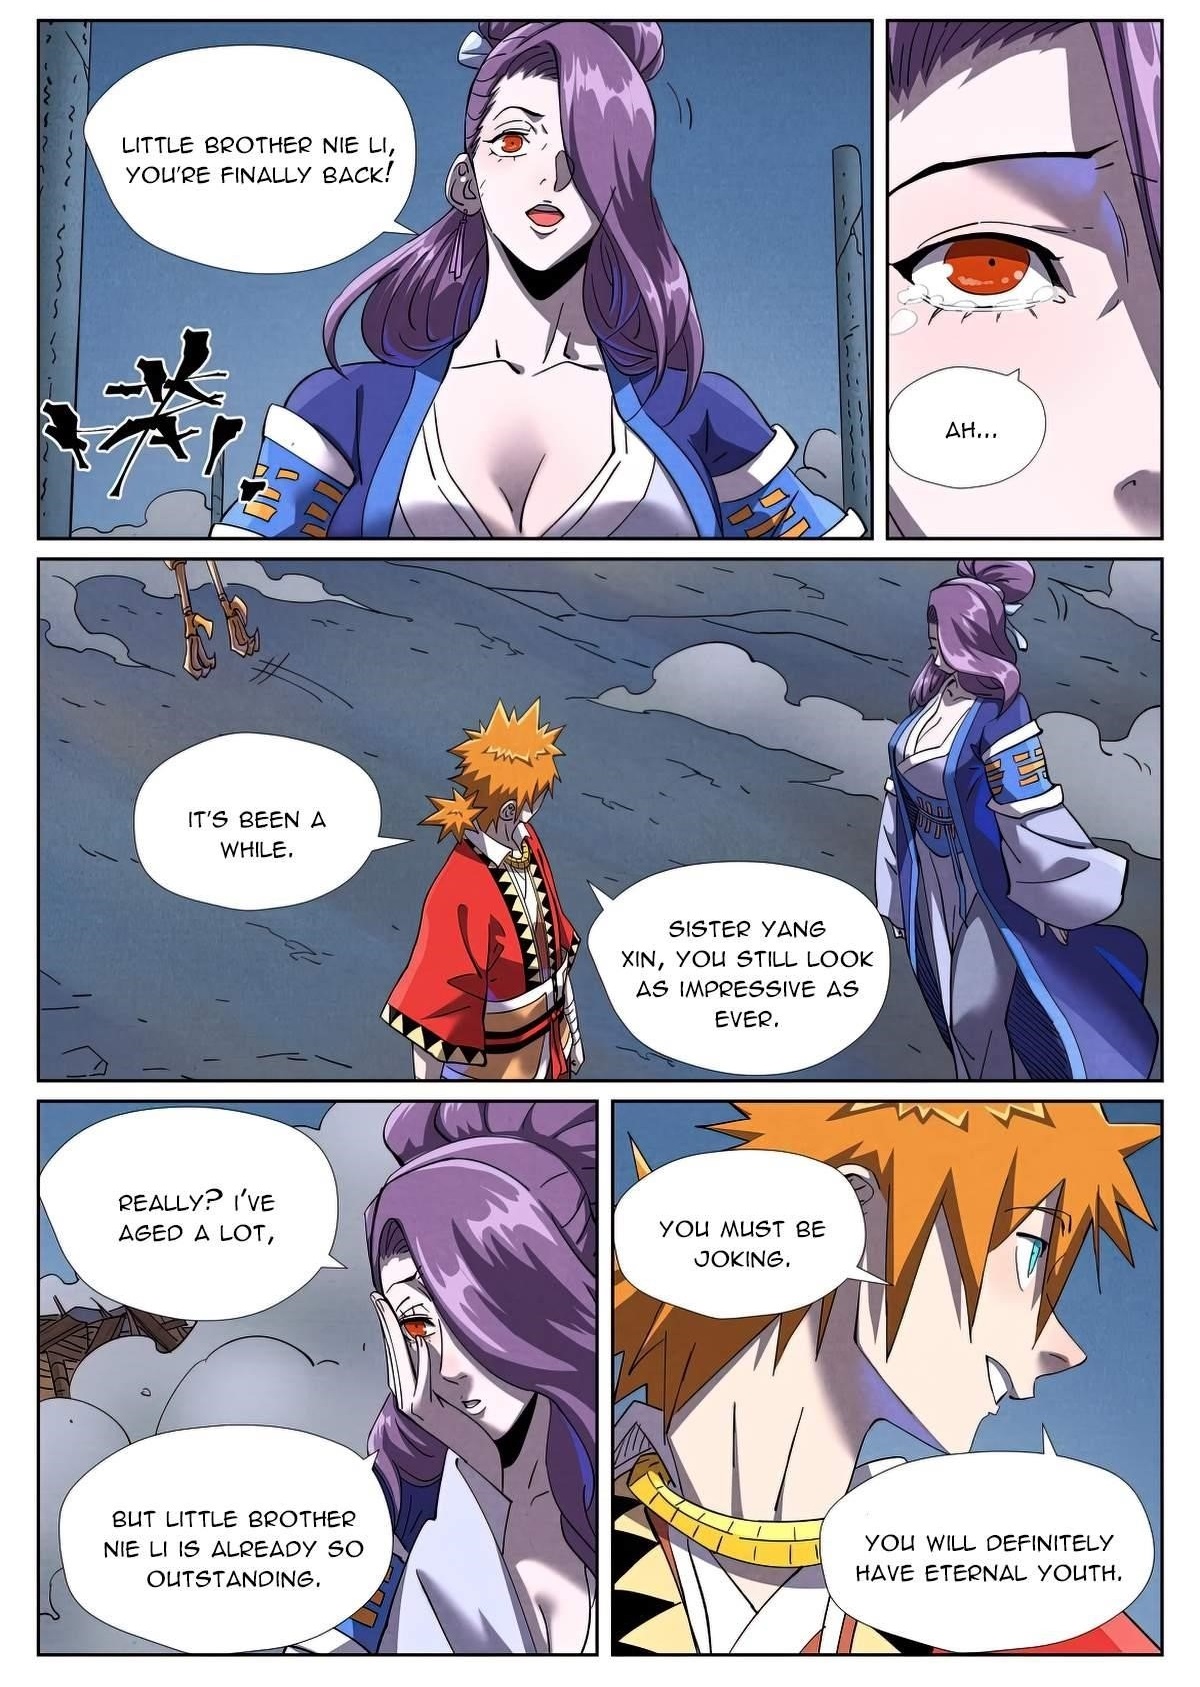 Read Tales of Demons and Gods Chapter 211.5 on Reaper Scans